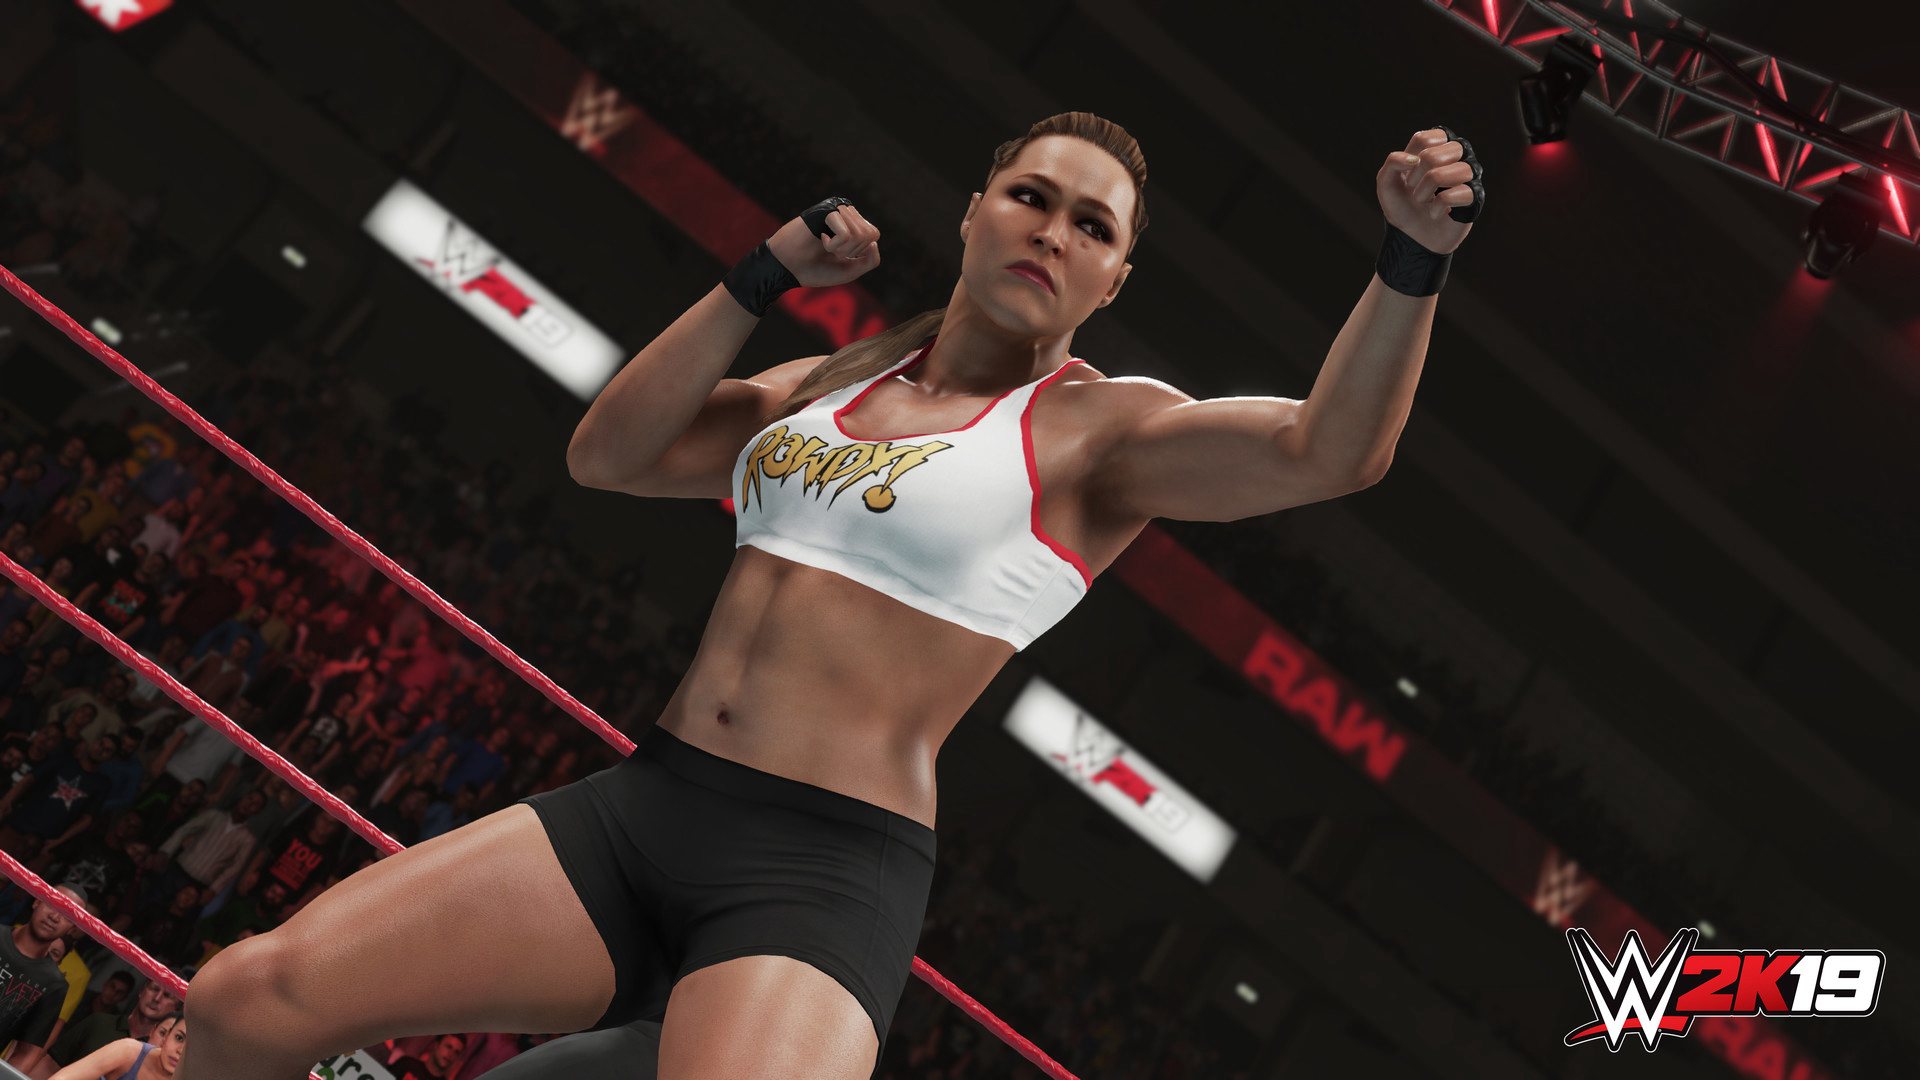 WWE 2K19 PlayStation 4 Account pixelpuffin.net Activation Link $15.81